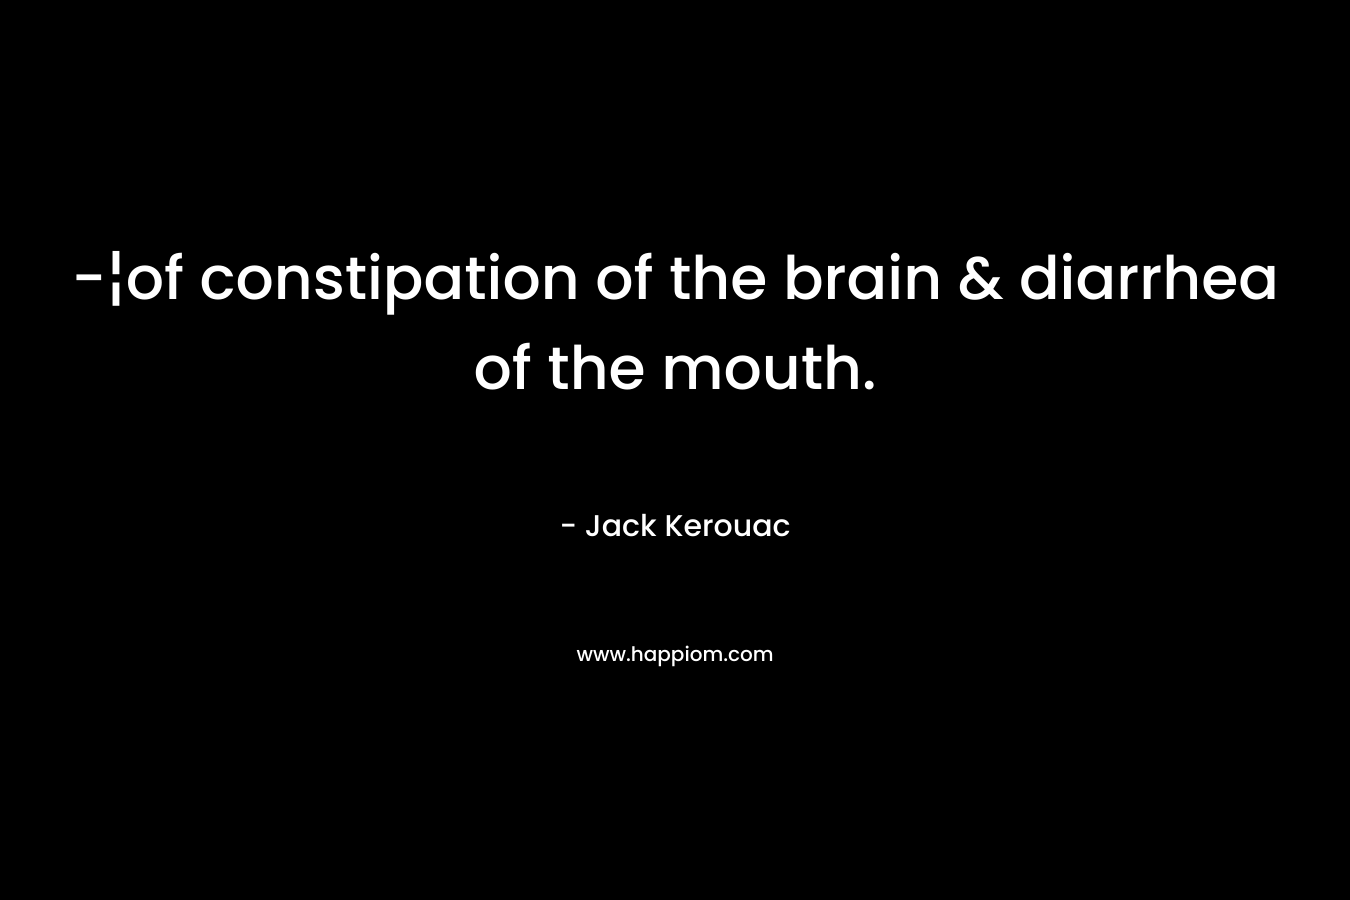 -¦of constipation of the brain & diarrhea of the mouth. – Jack Kerouac